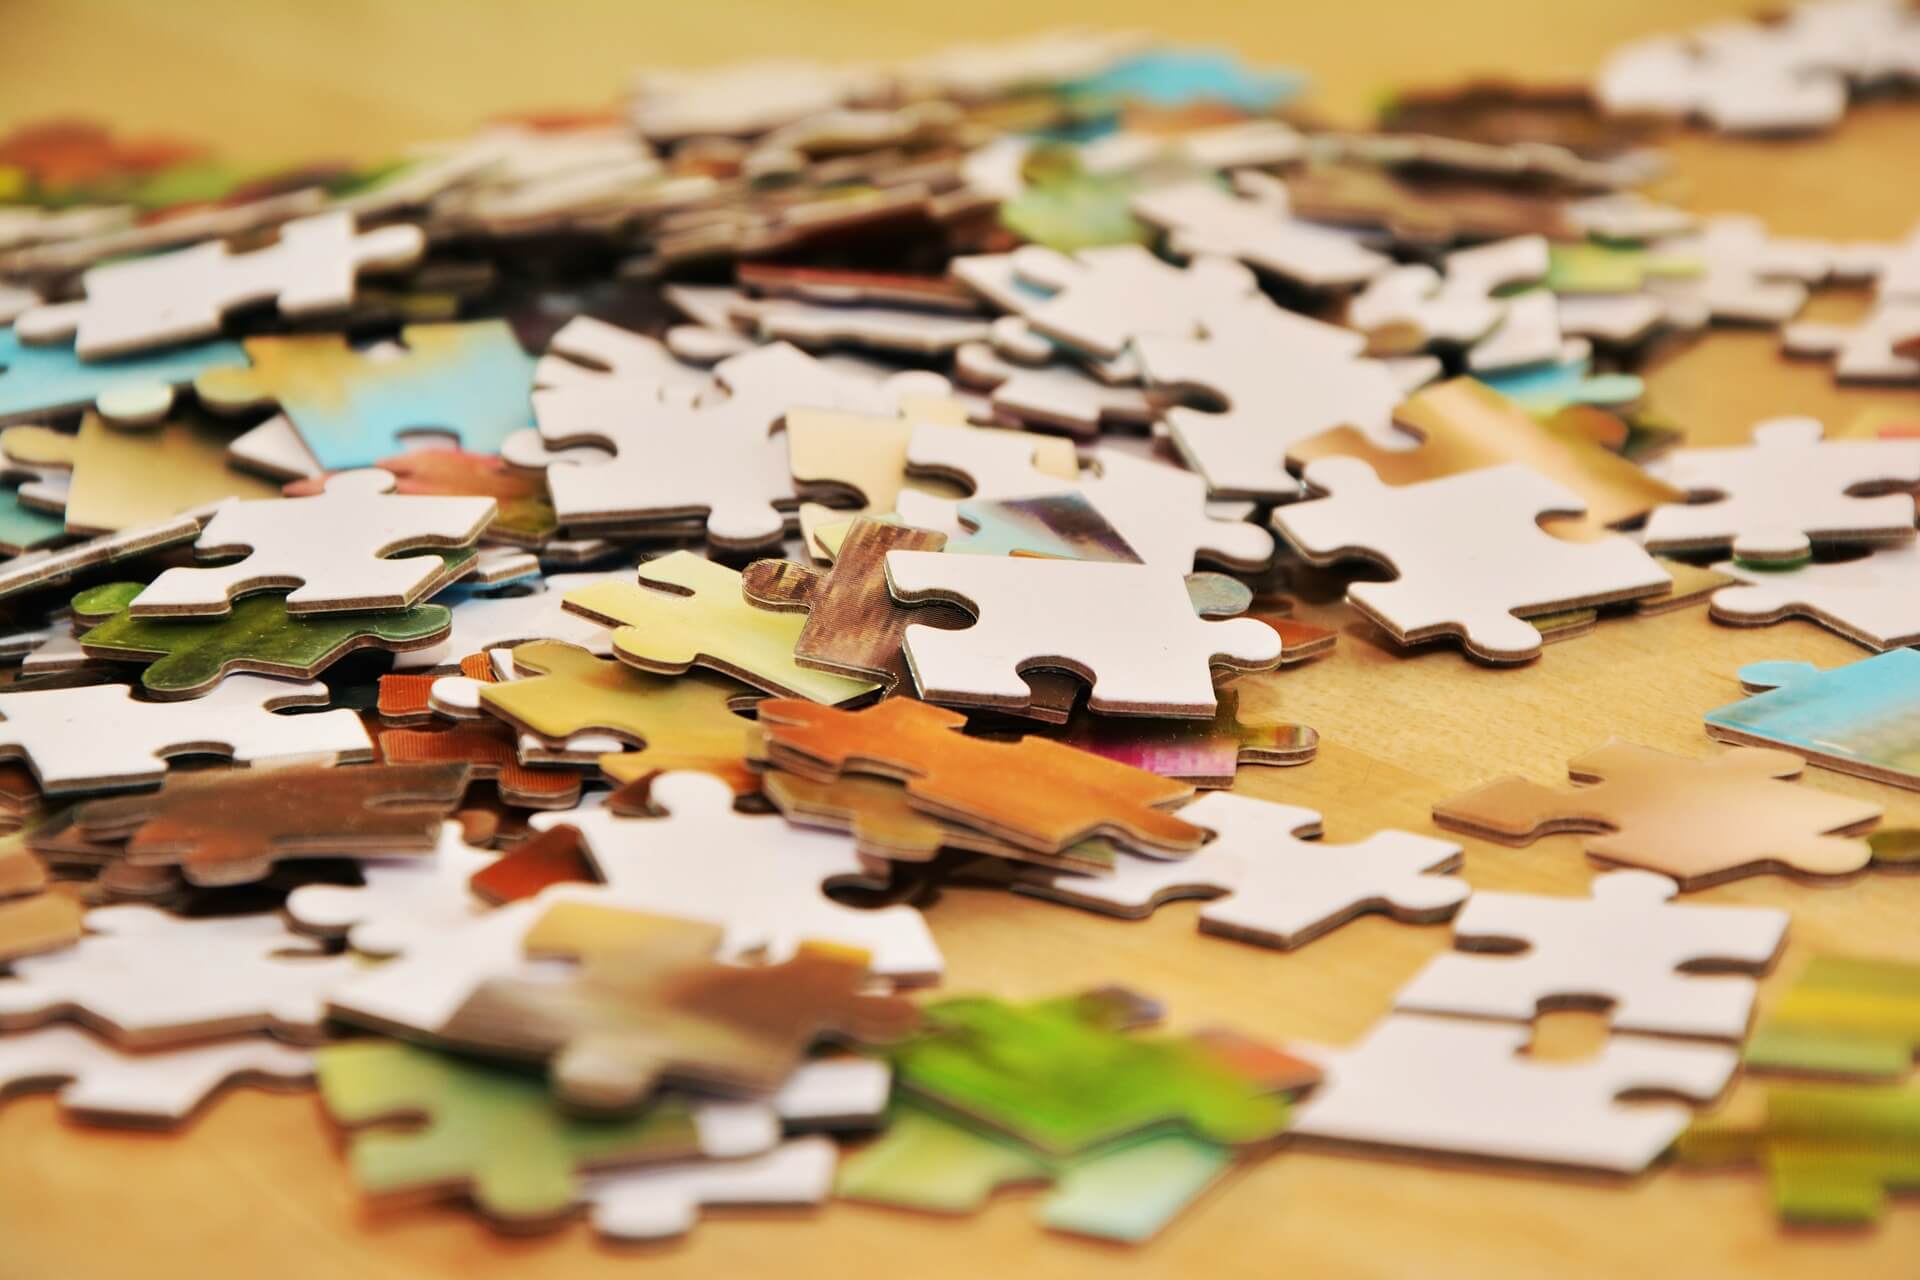 An image of a pile of puzzle pieces. An HR organization has all the necessary pieces for employee onboarding, but hasn't created a process for it yet.